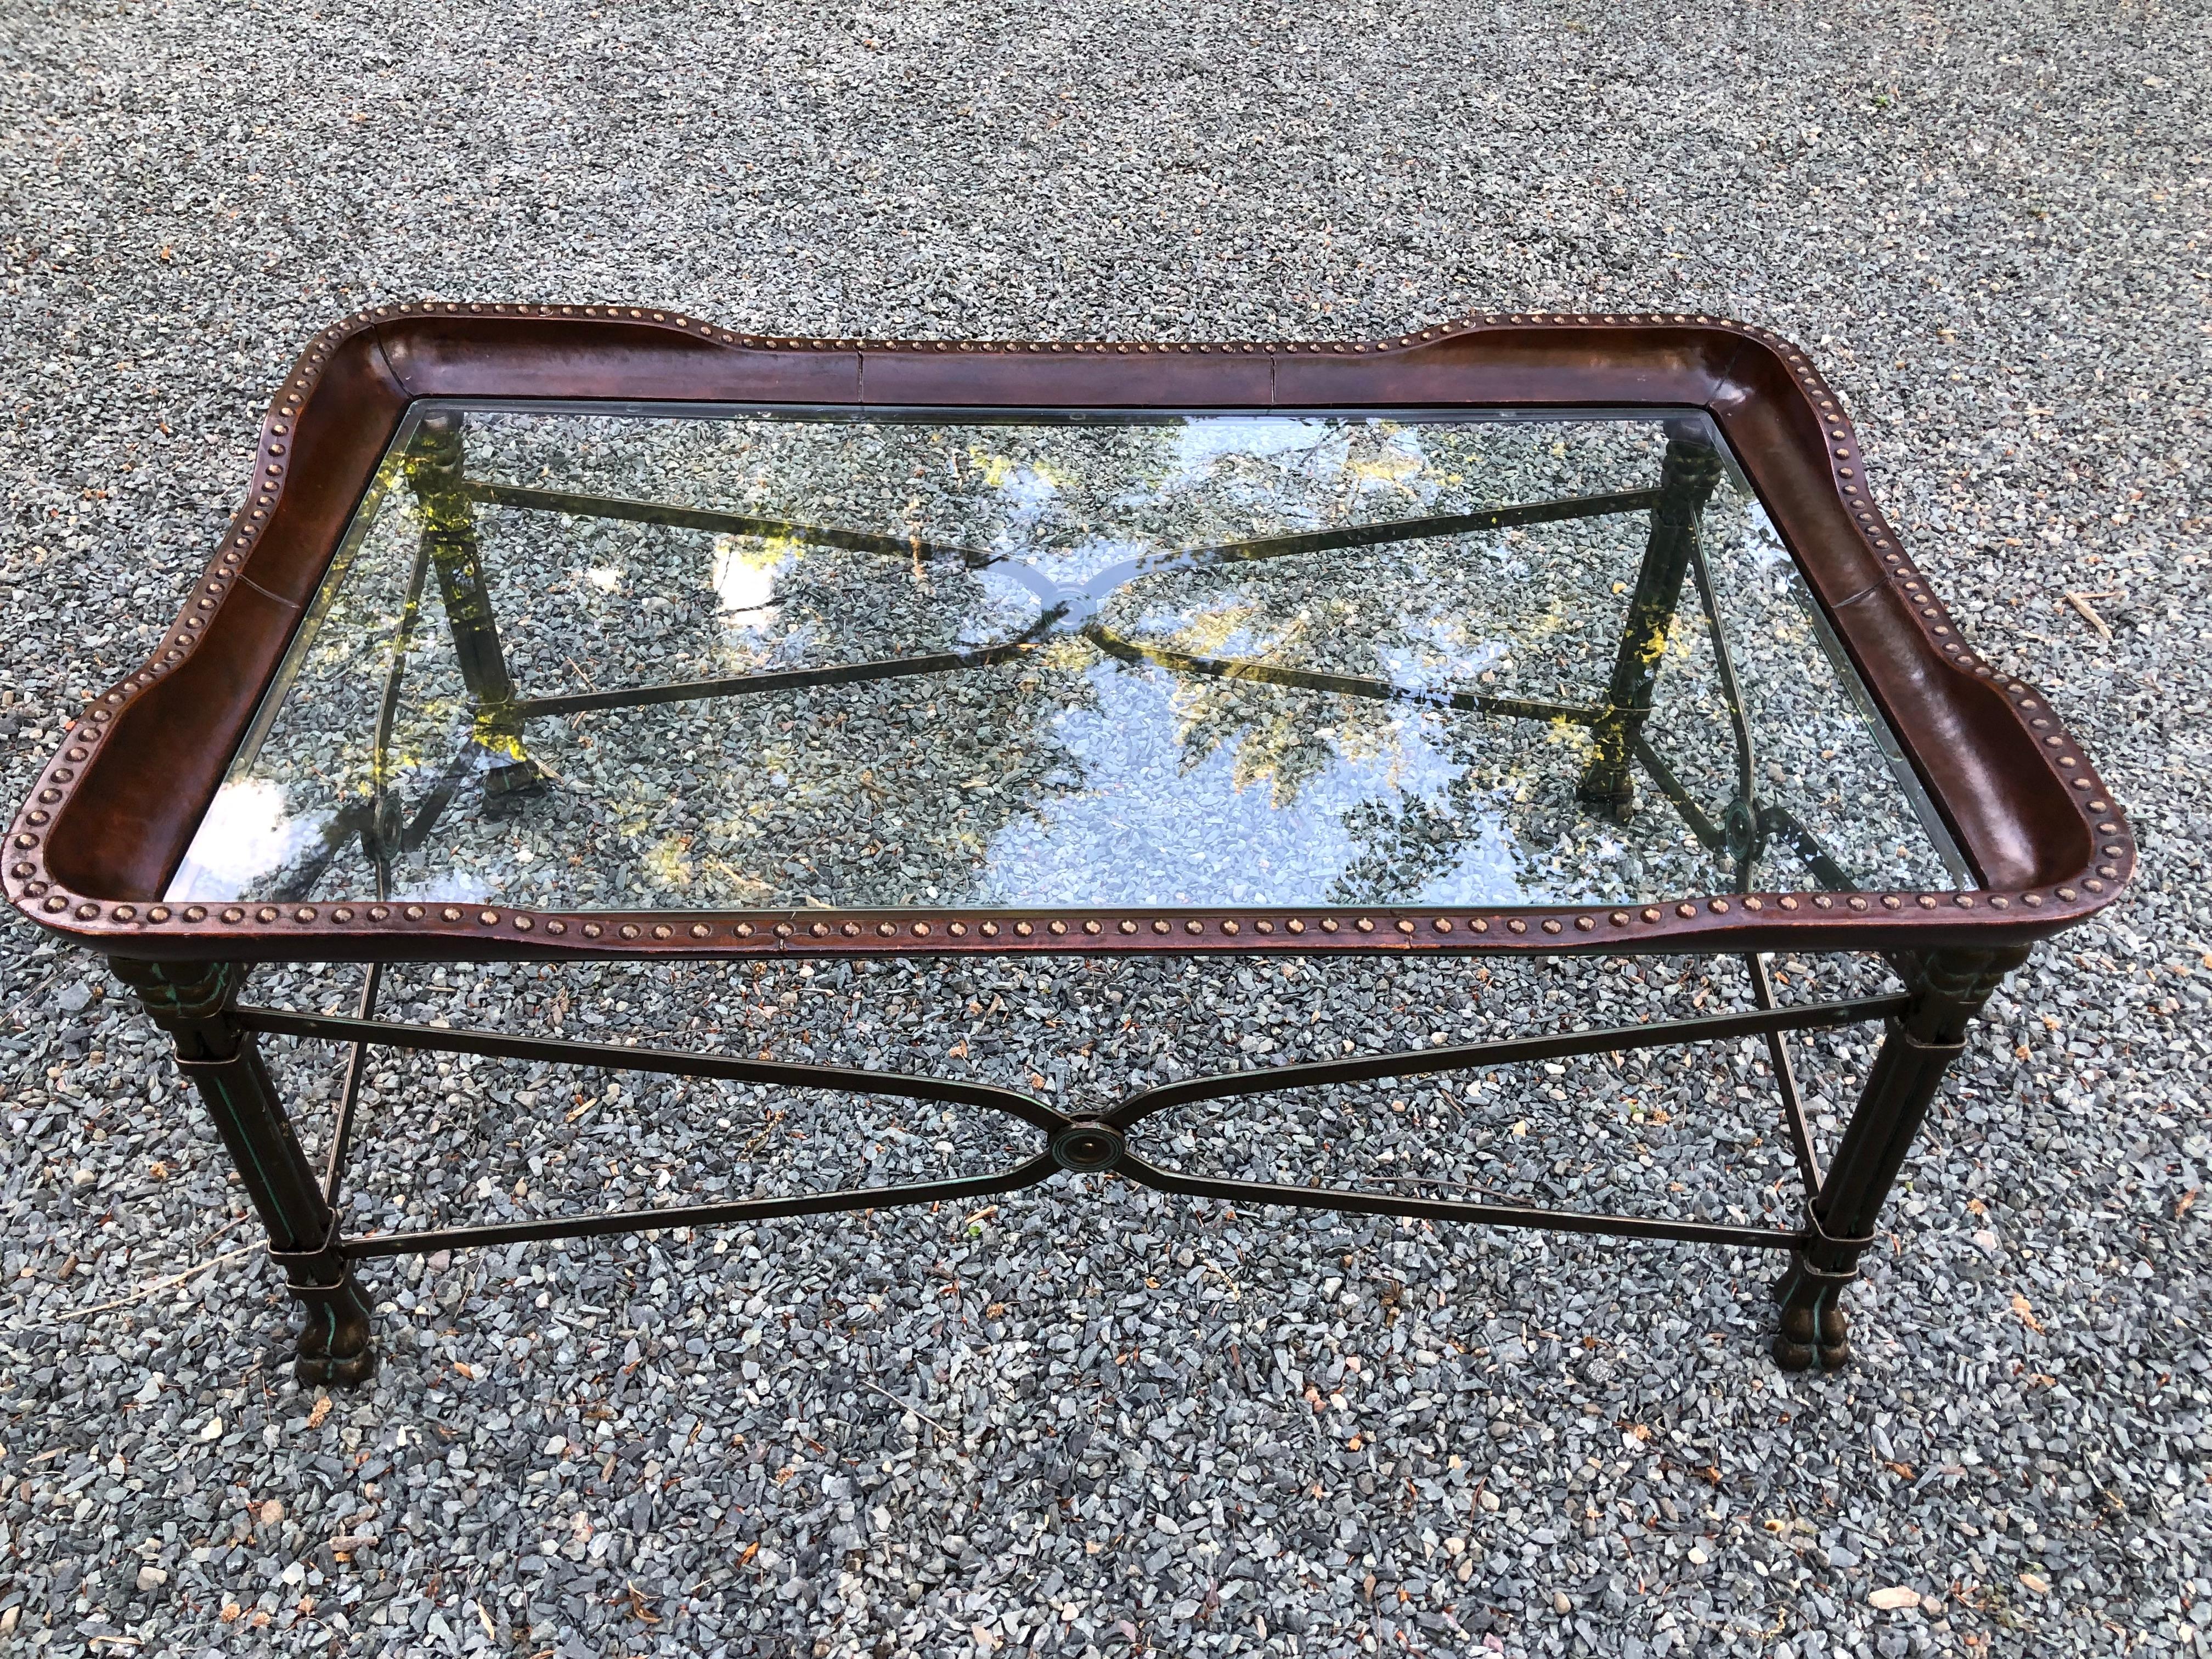 Very handsome Regency style iron and leather rectangular coffee table with lion paw feet. The table has metal stretchers, a deep brown leather surround with brass nailheads, and glass top. 

 